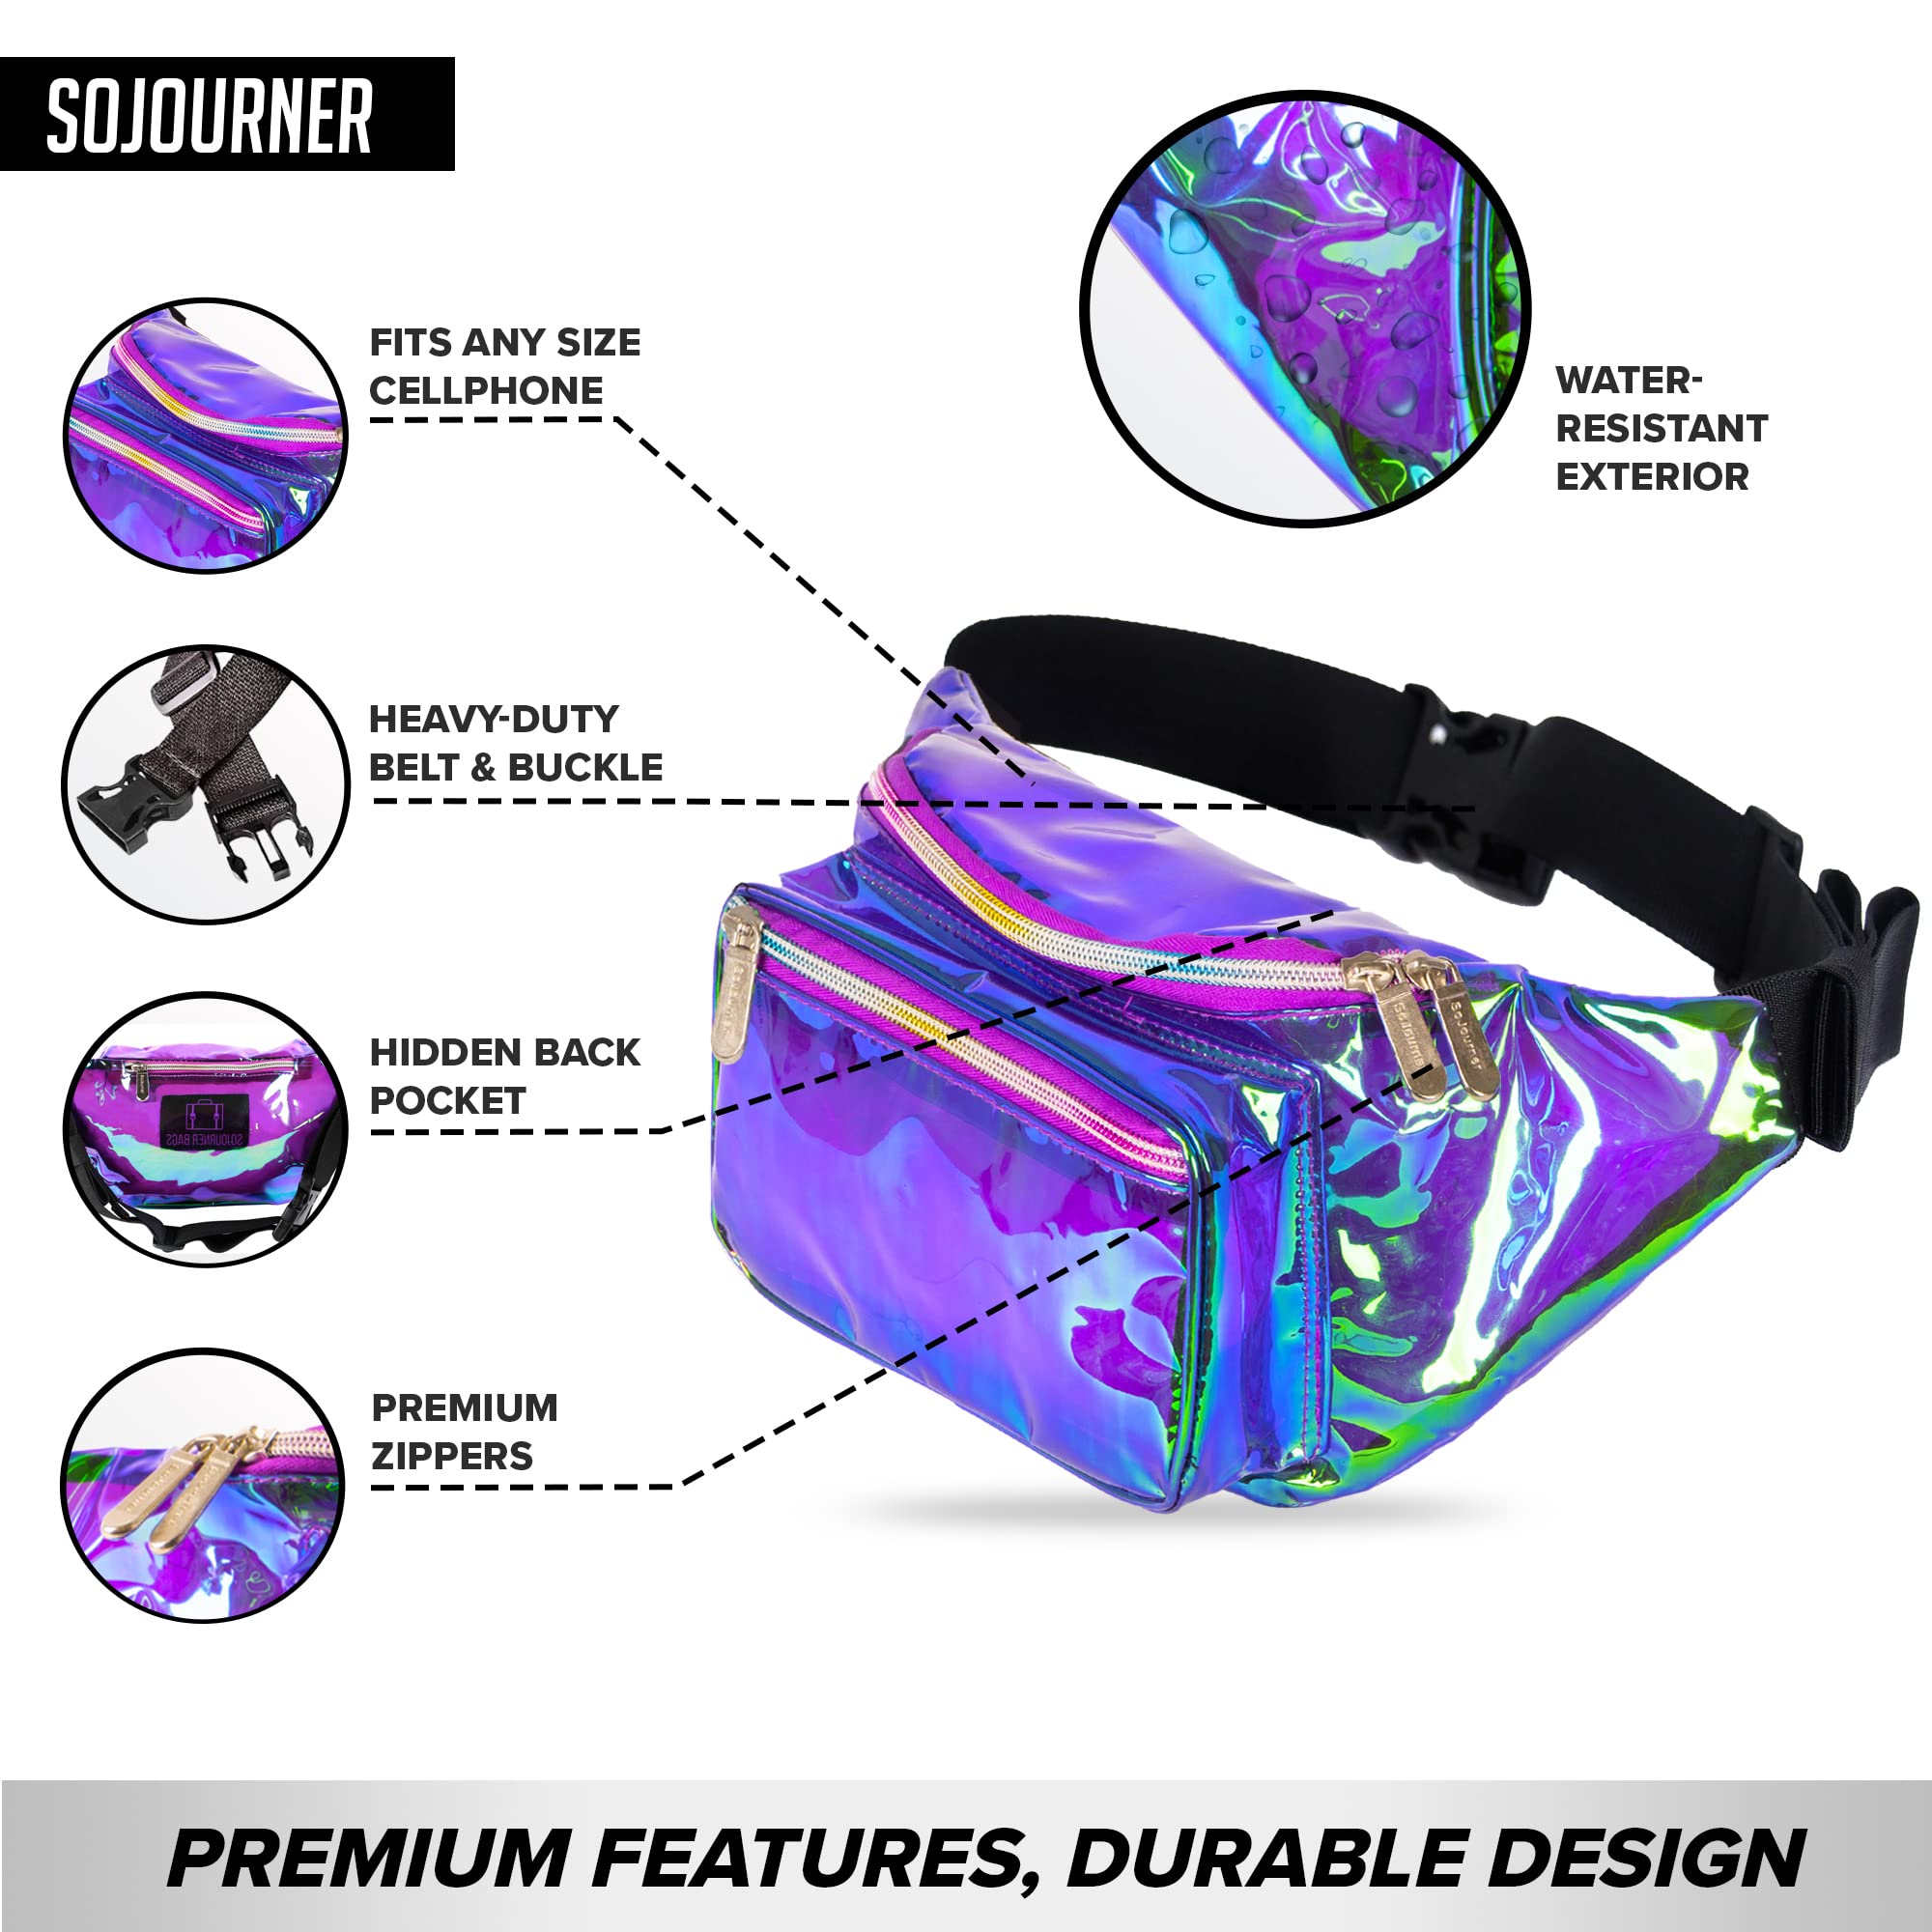 Holographic Clear Fanny Pack Belt Bag | Waterproof fanny pack for Women - Crossbody Bag Bum Bag Waist Bag Waist Pack - For Halloween costumes, for Hiking, Running, Travel and Stadium Approved (purple)